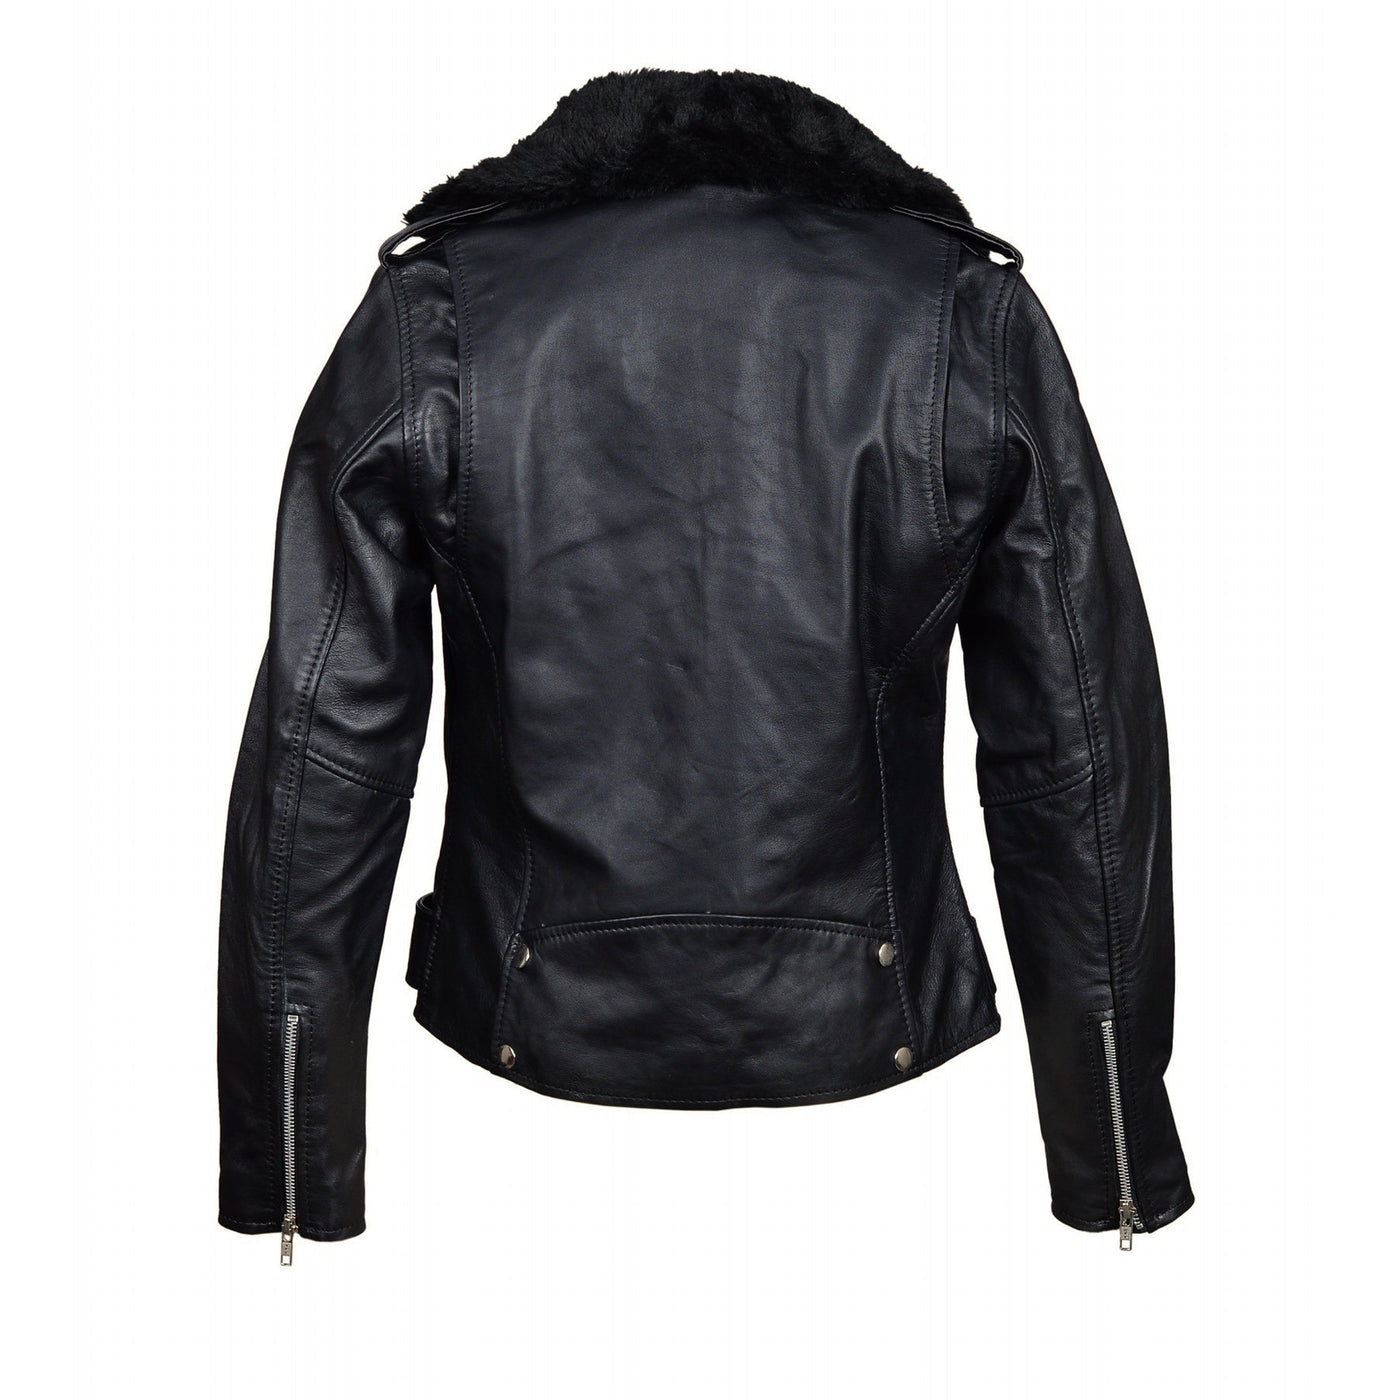 Eira's biker style leather jacket with fur collar – Lusso Leather